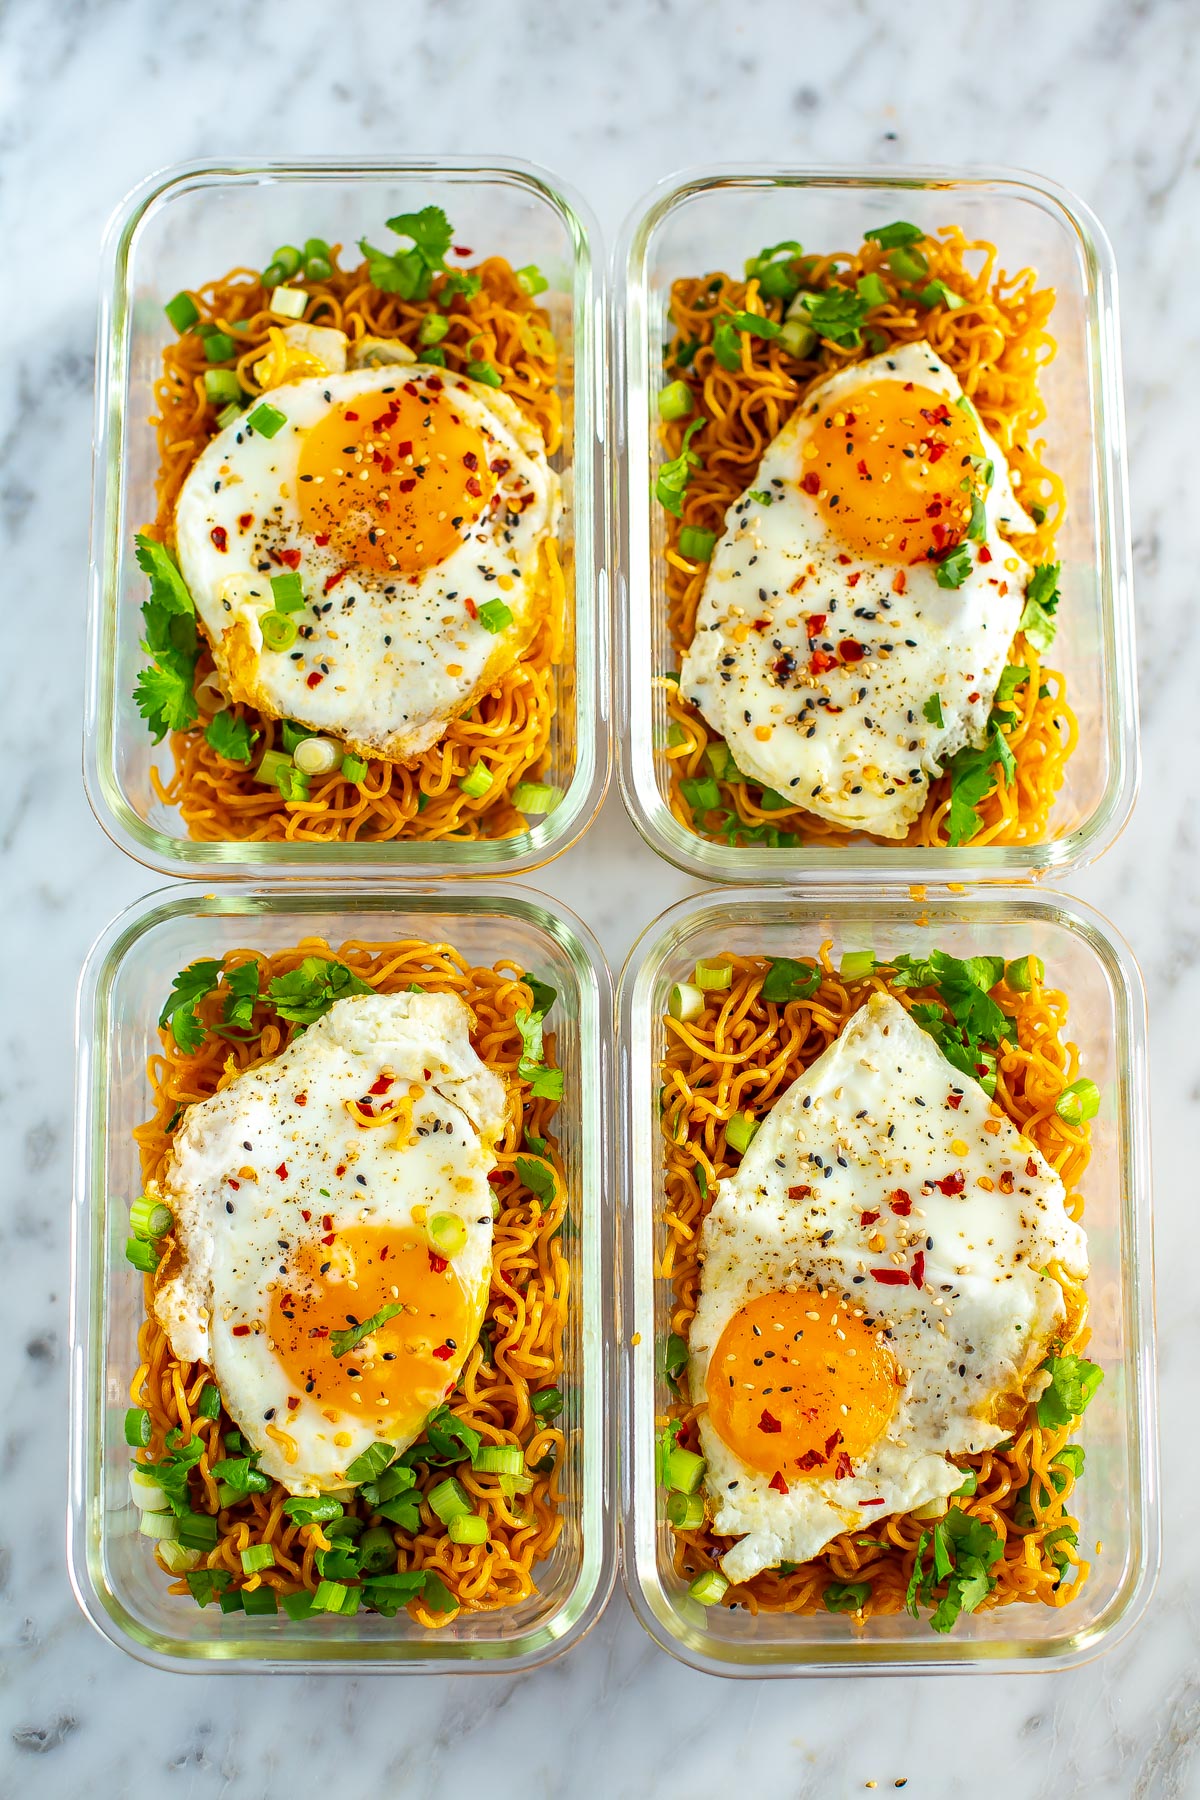 Four meal prep containers, each with a serving of spicy noodles topped with a fried egg.